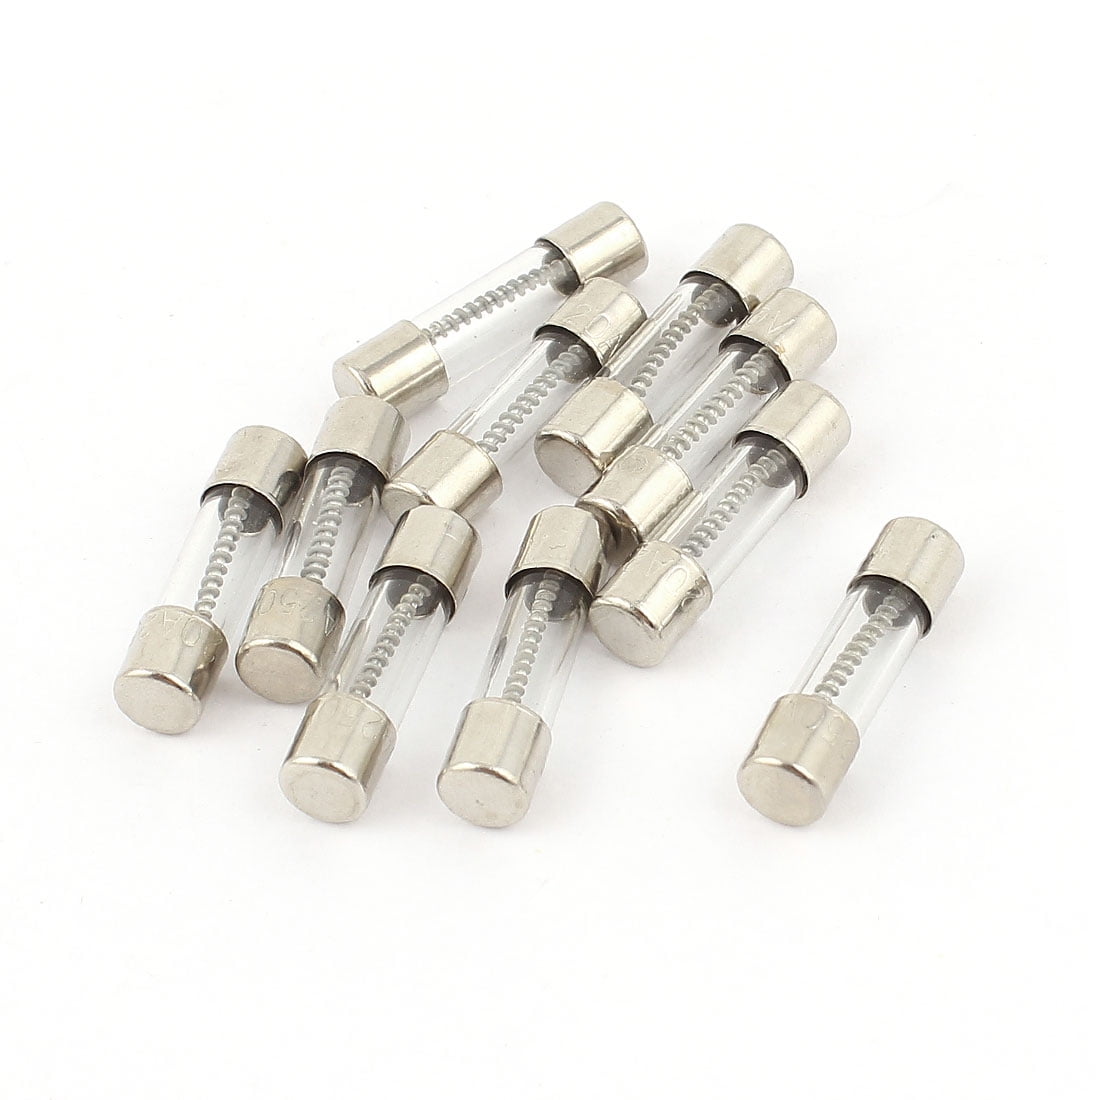 10 x 1A 5x20mm Glass Slow Blow Fuse 